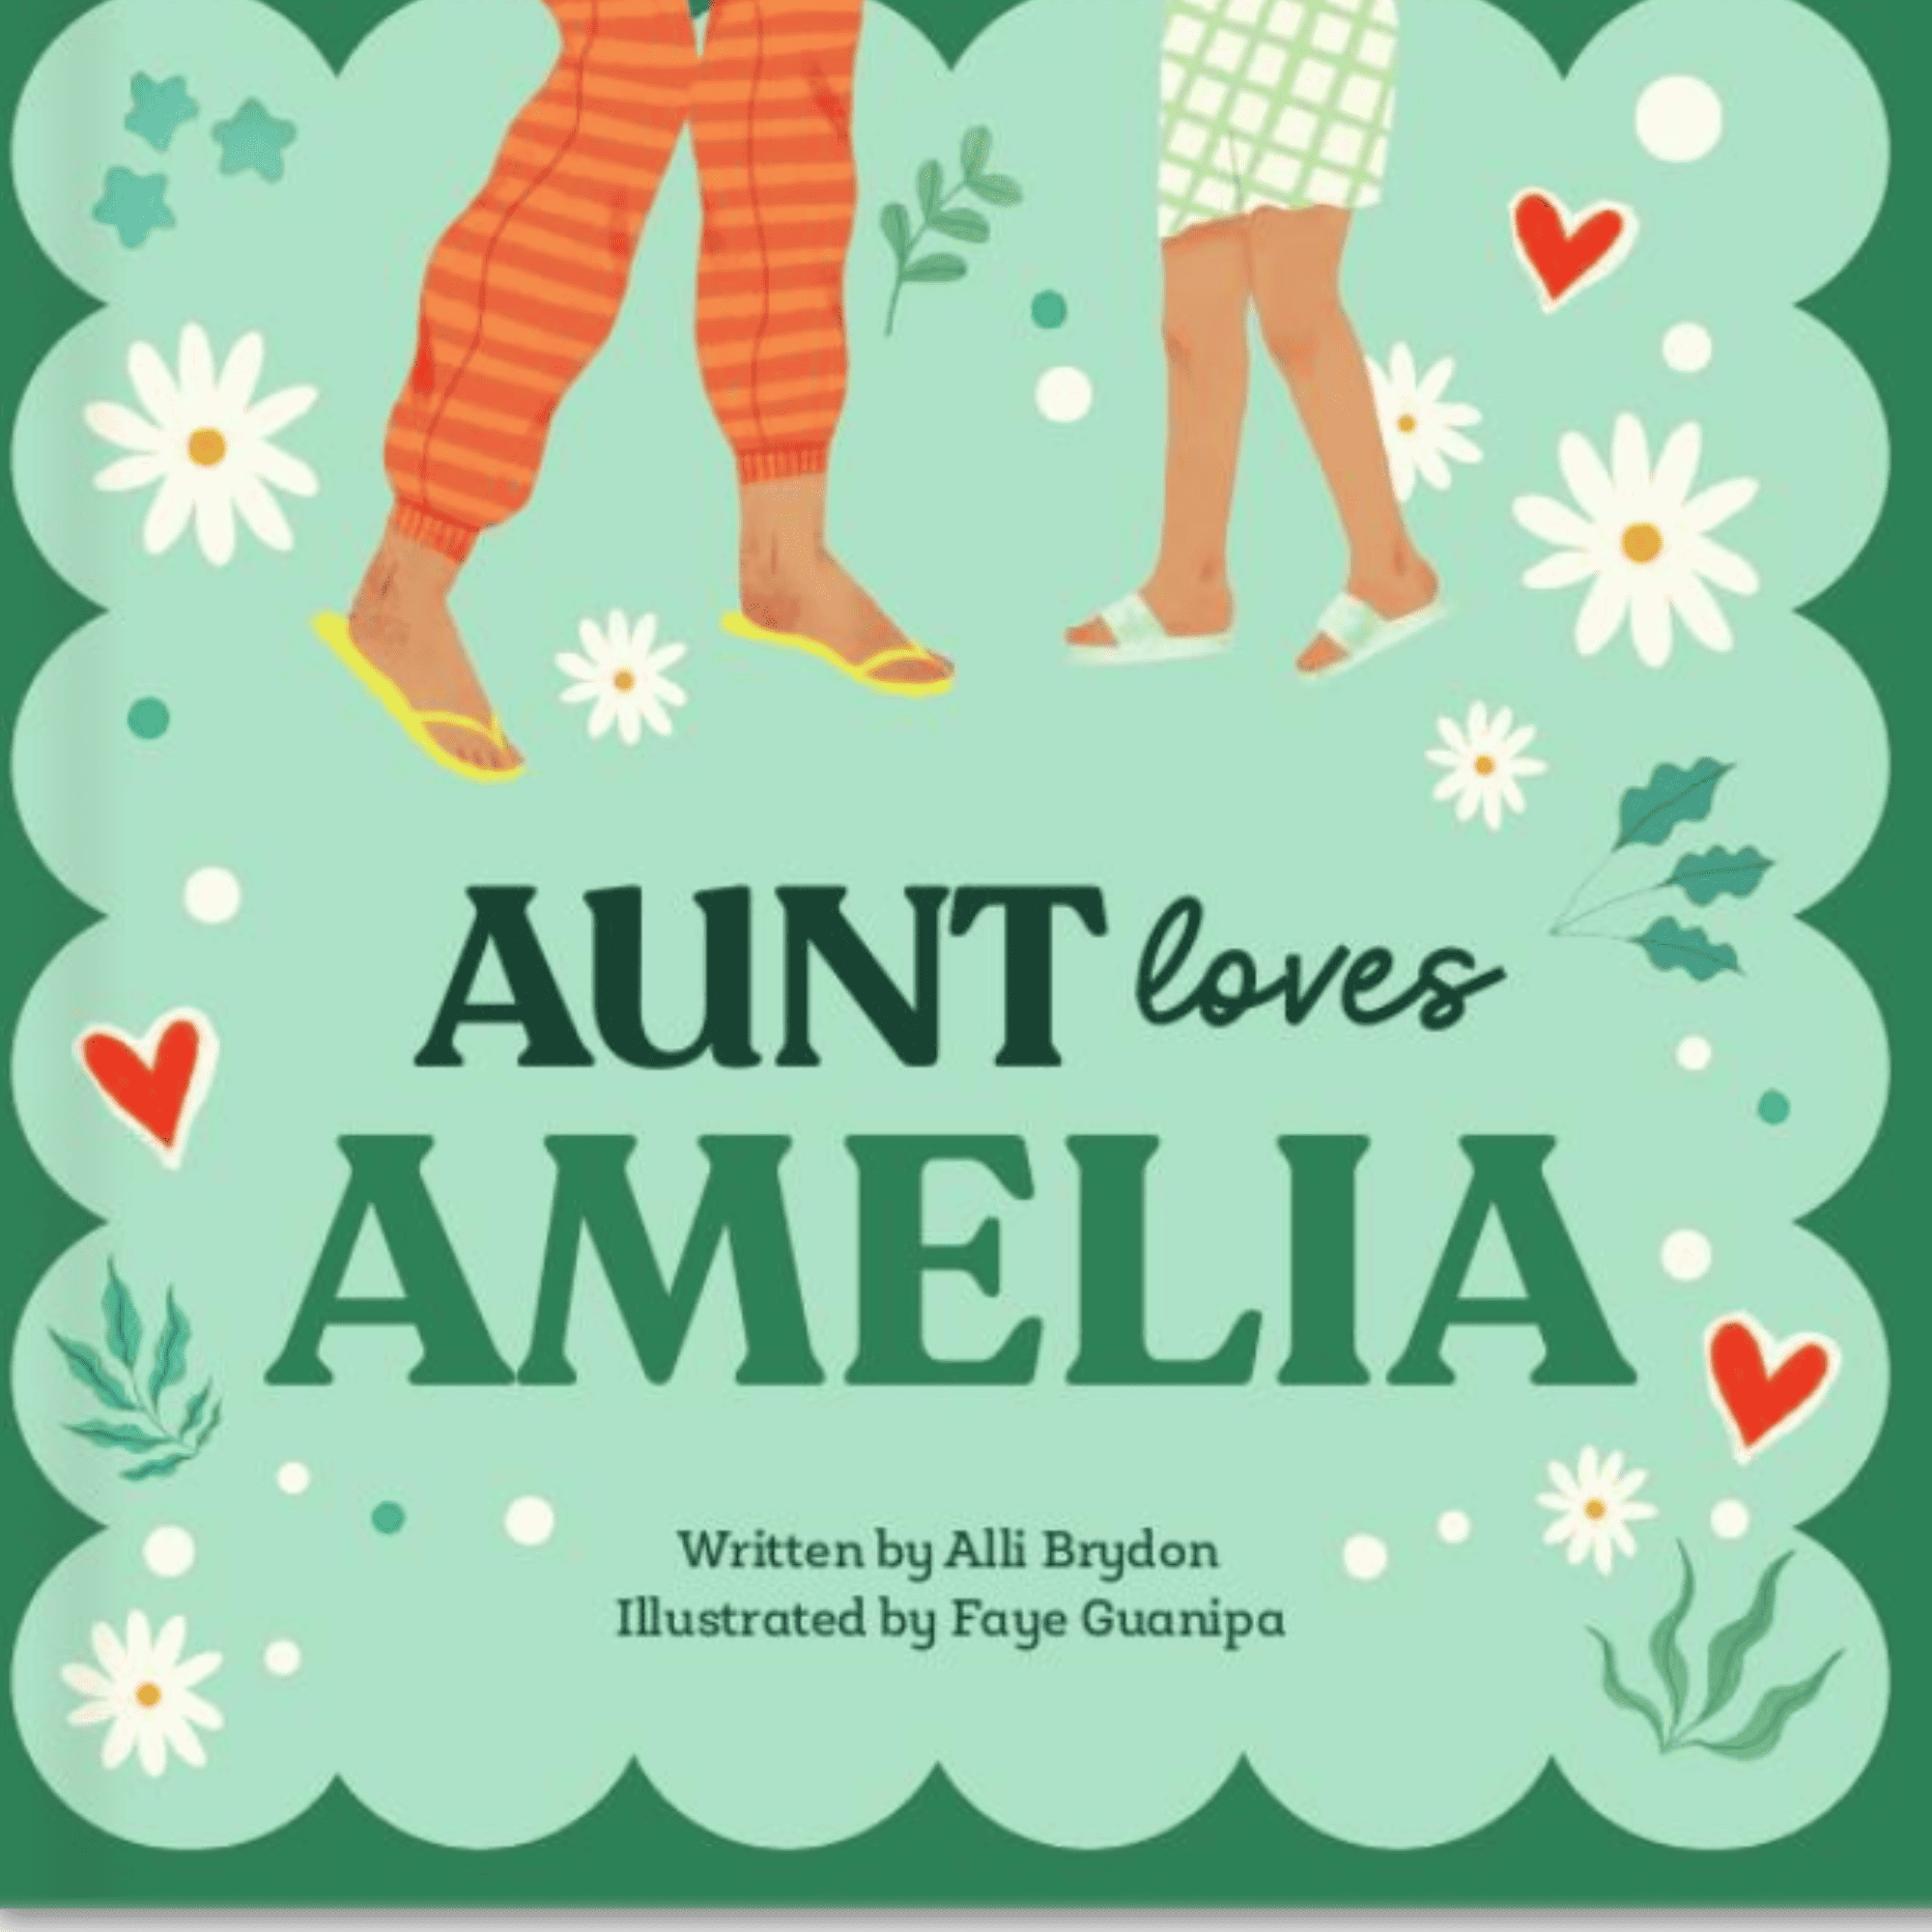 Auntie and Me Book